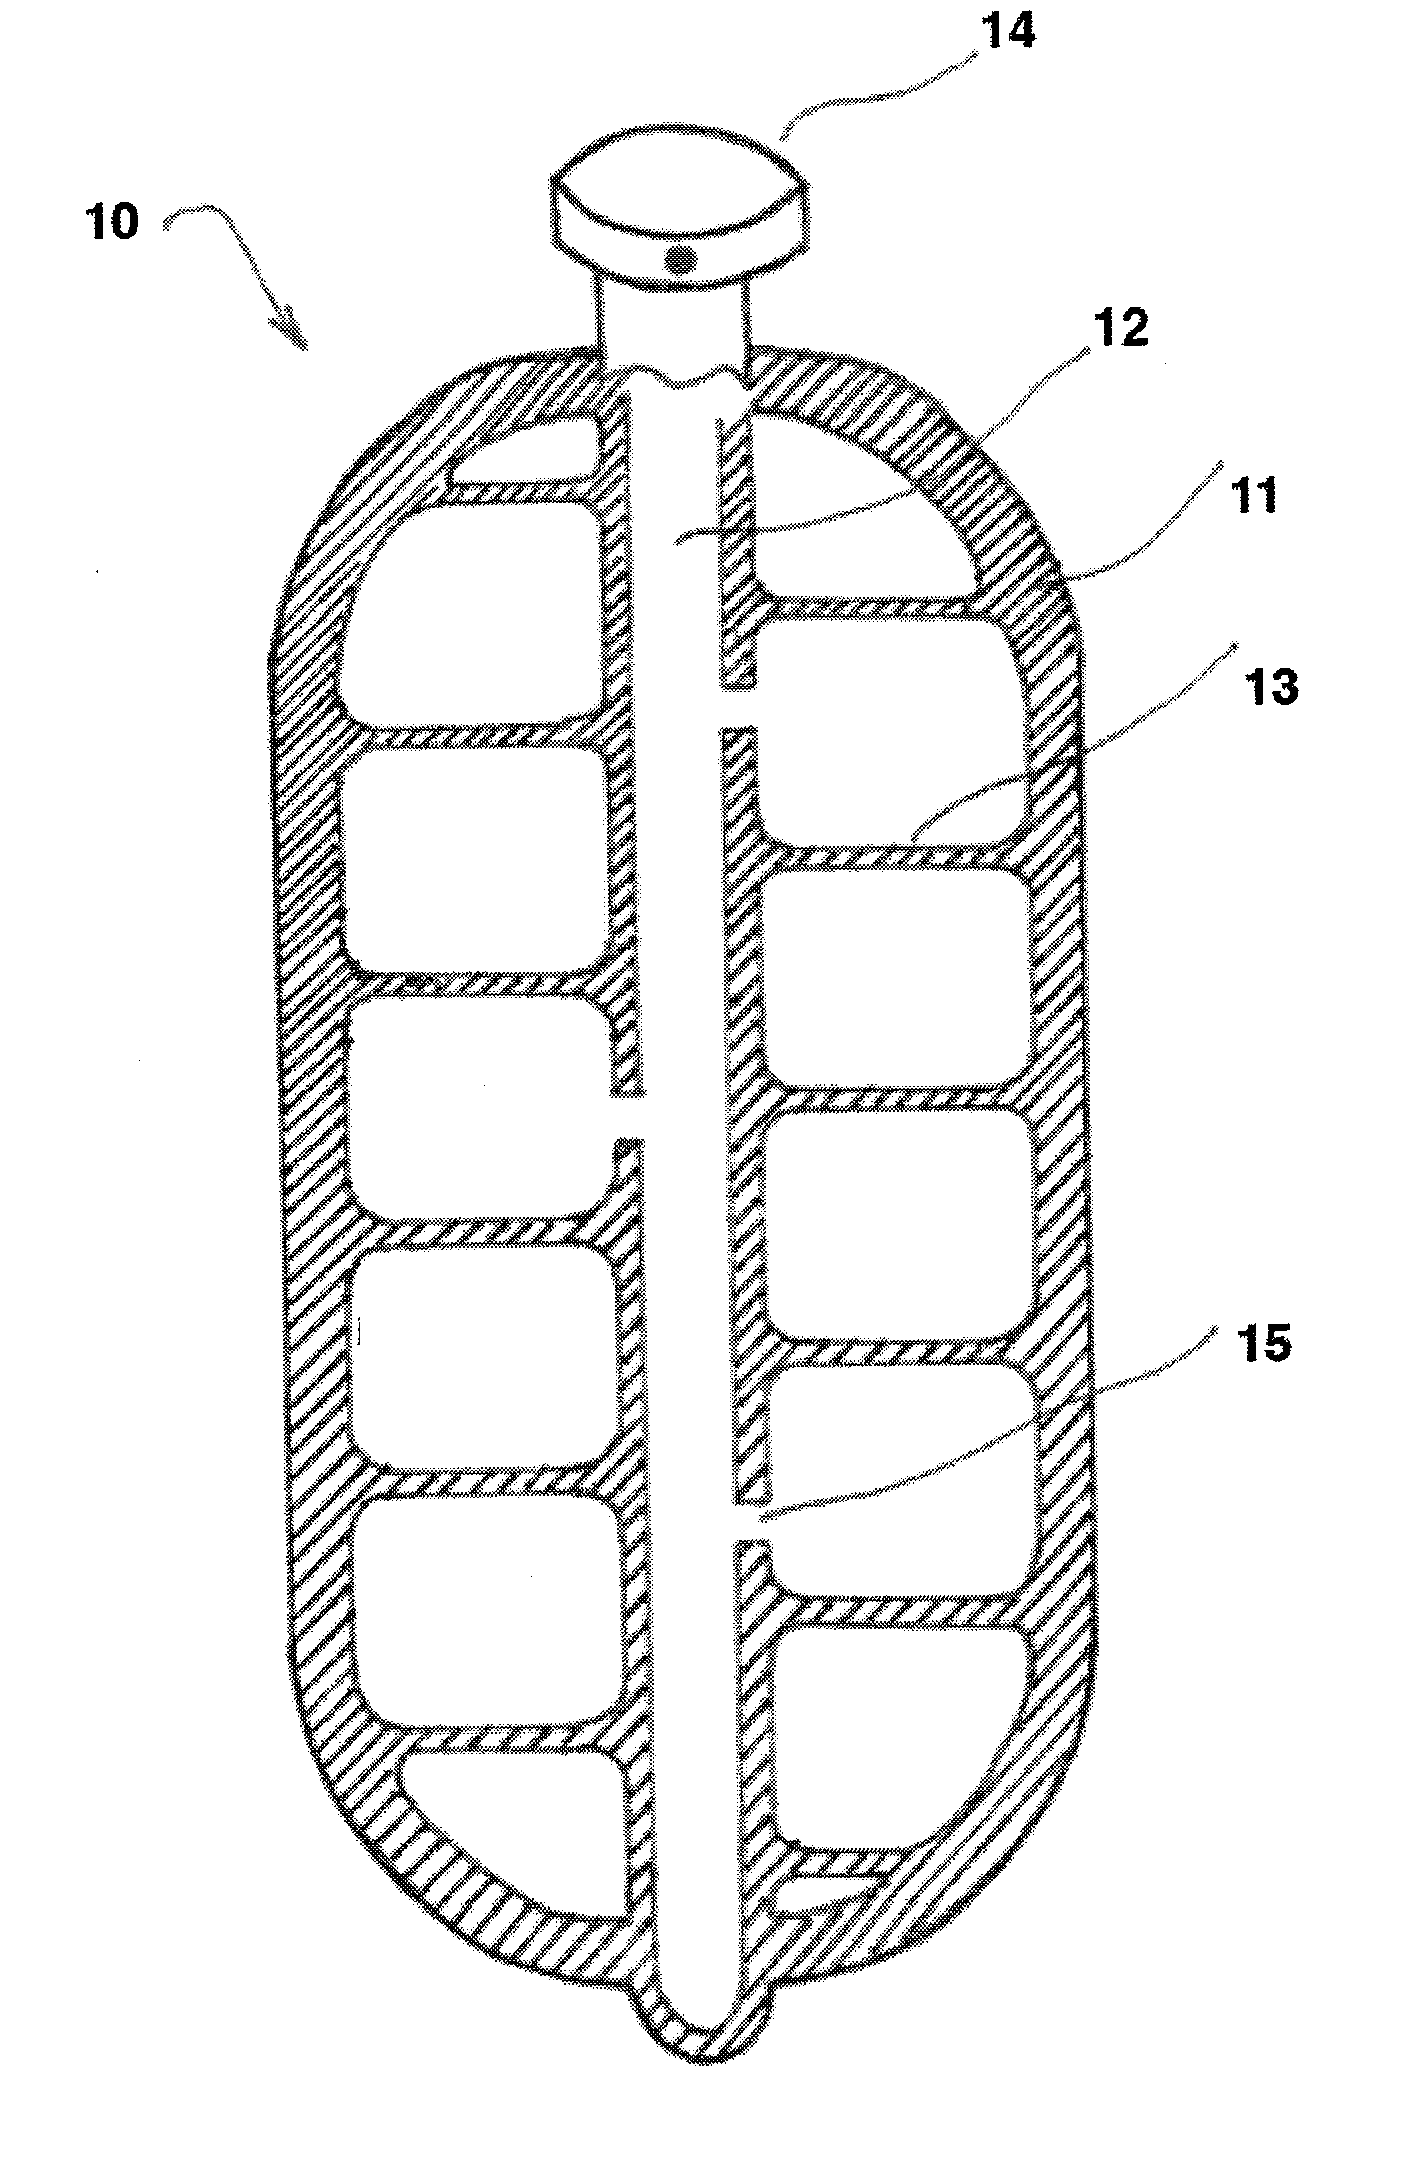 Pressure Vessels, Design and Method of Manufacturing Using Additive Printing